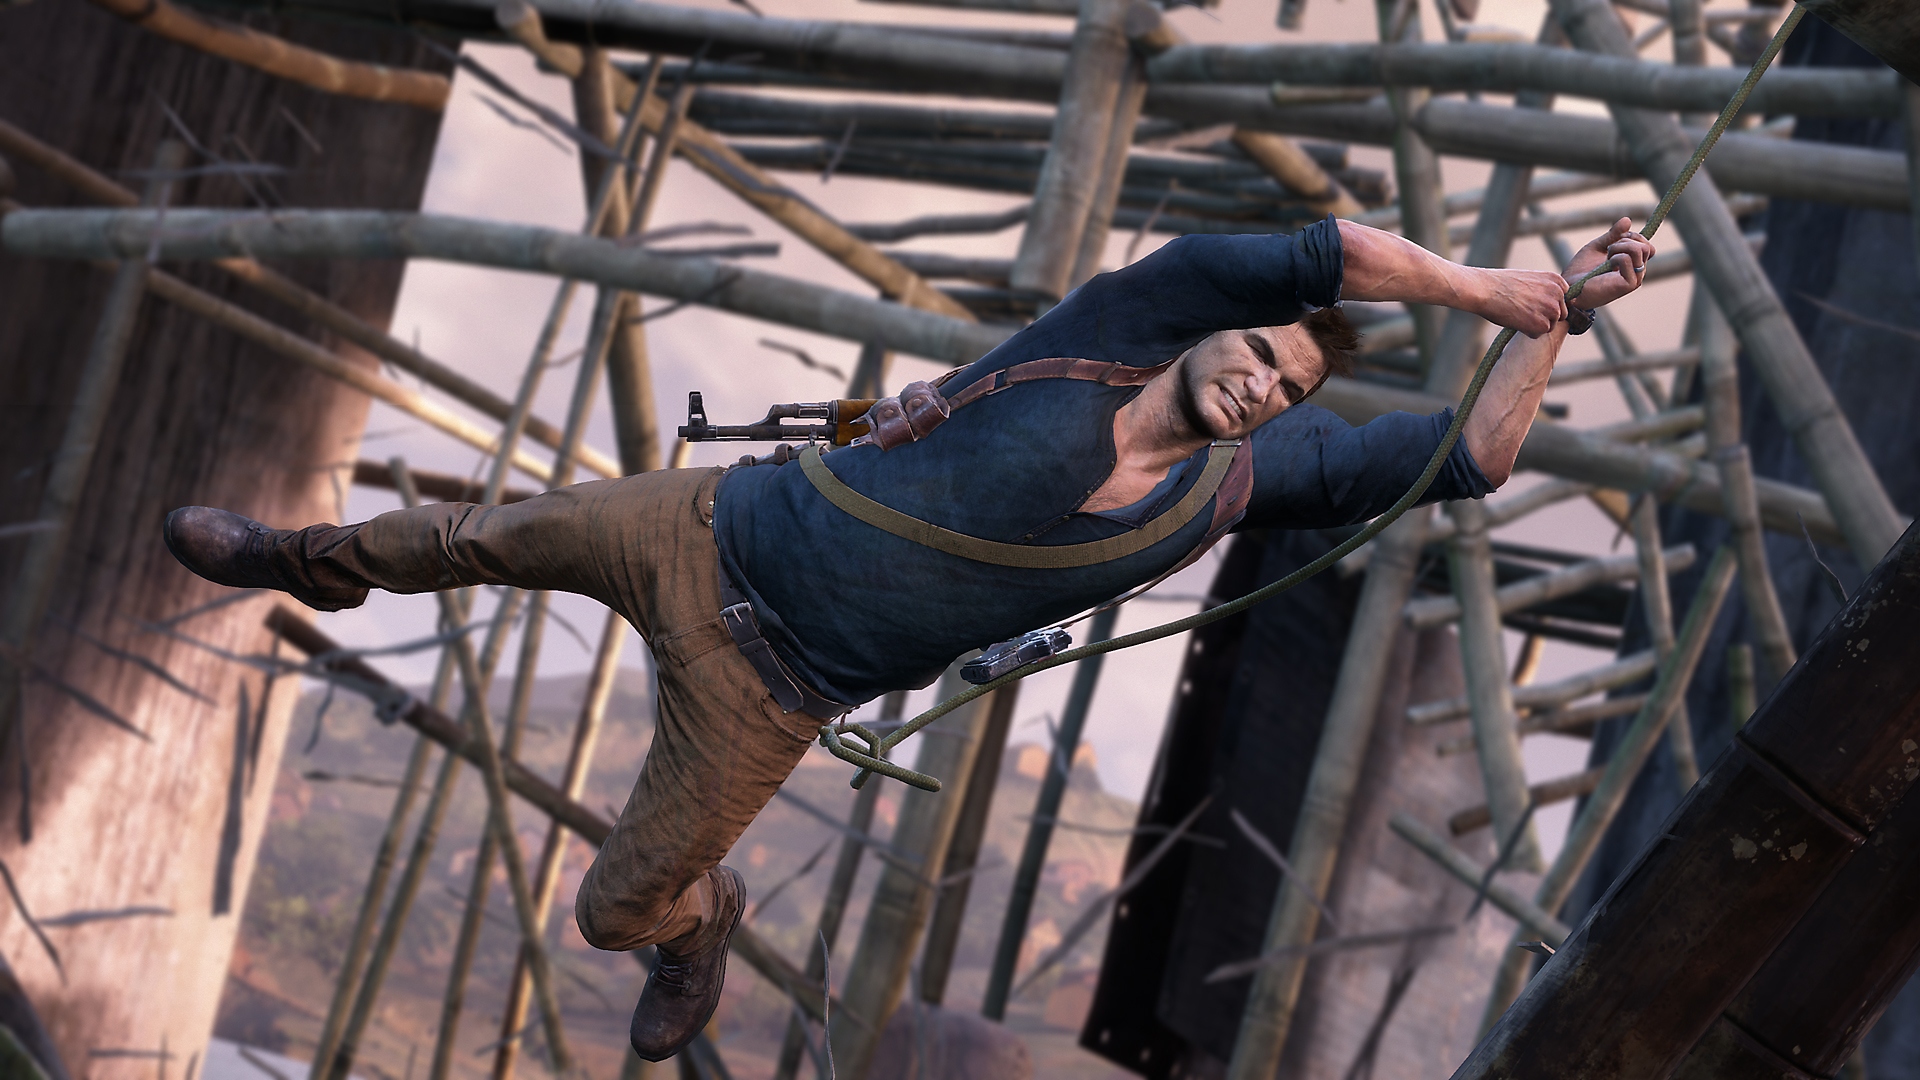 UNCHARTED a thief's end screenshot